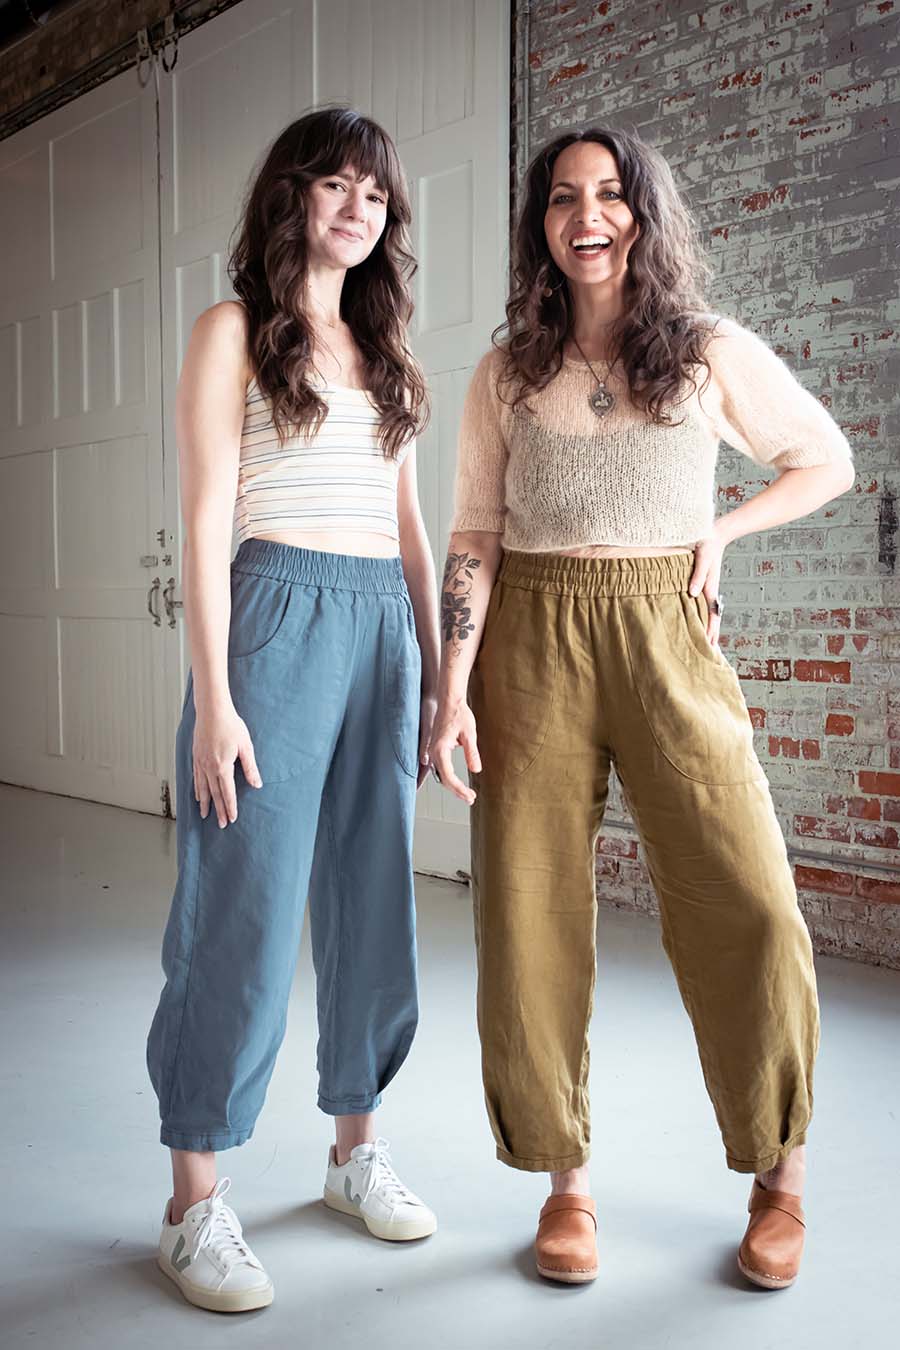 Meg wears olive chanterelle pants and Meredith wears blue ones